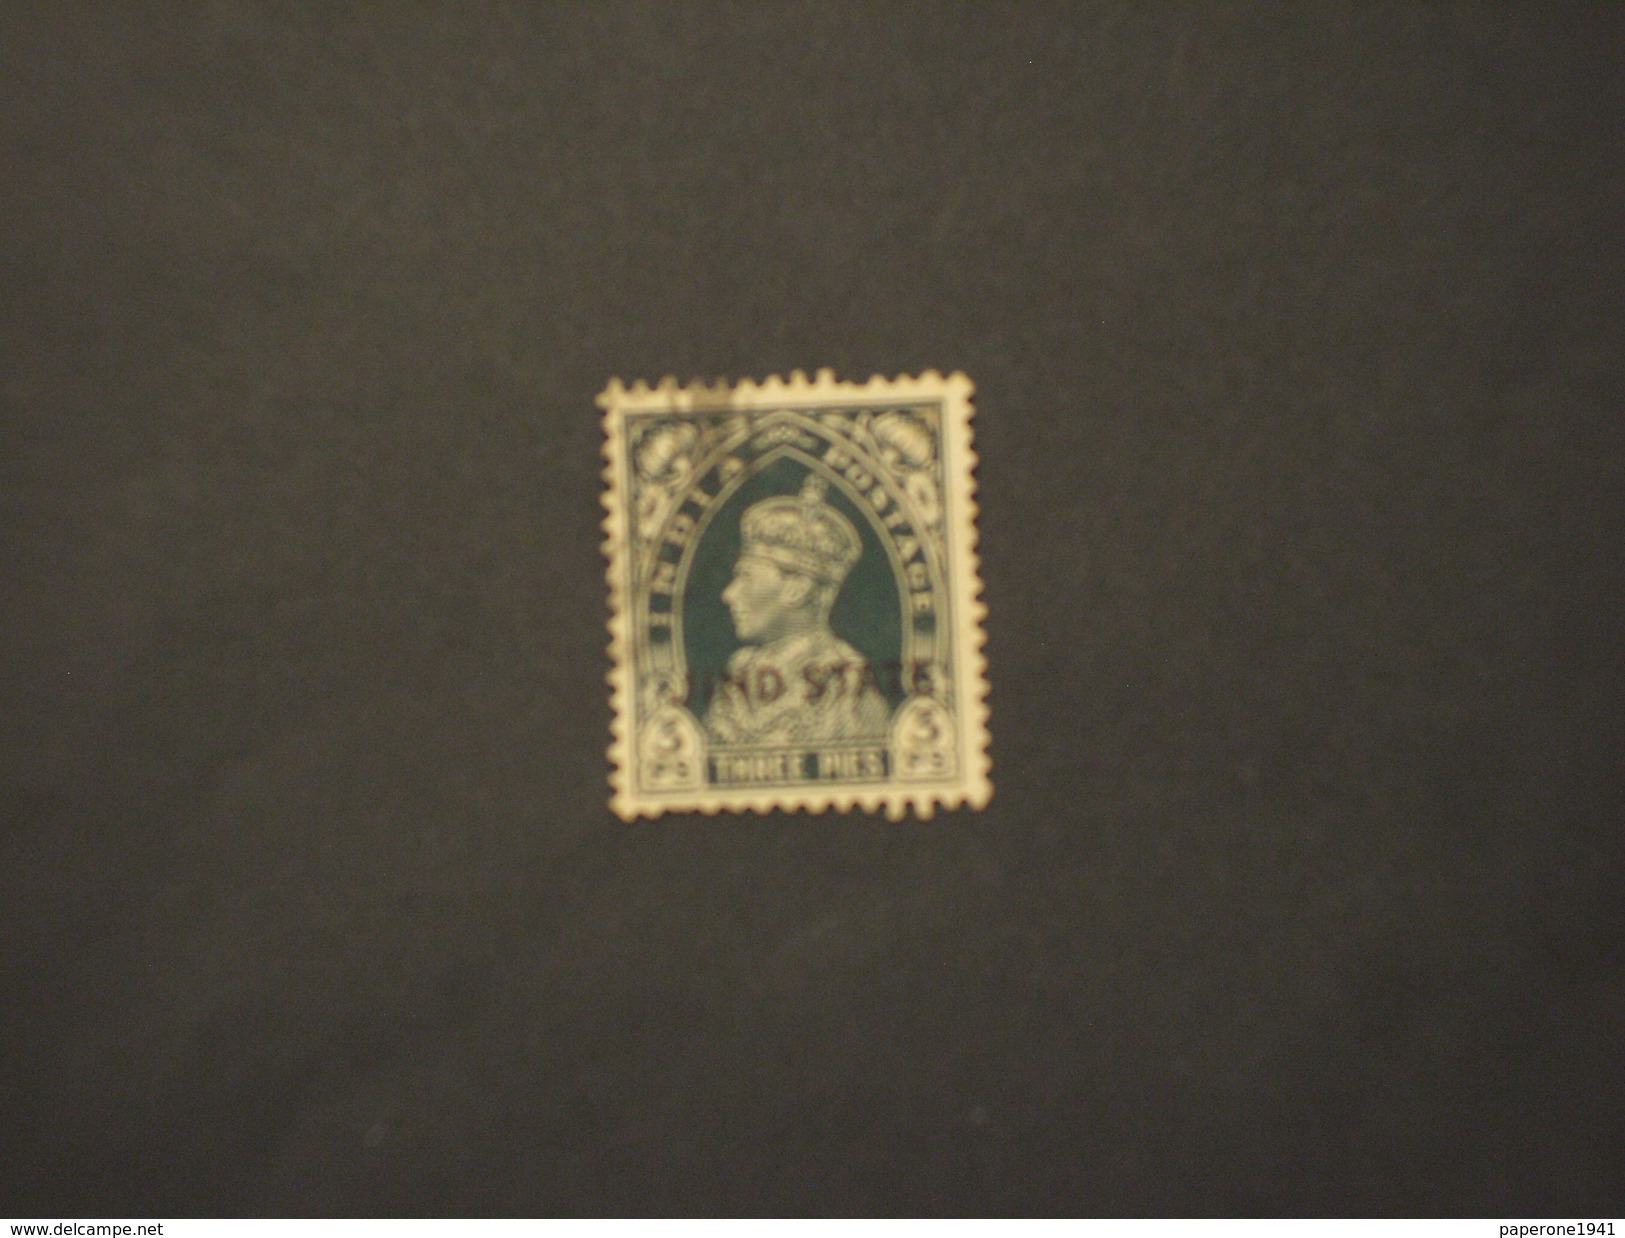 JHIND - 1938  RE  3 PI. - TIMBRATO/USED - Jhind